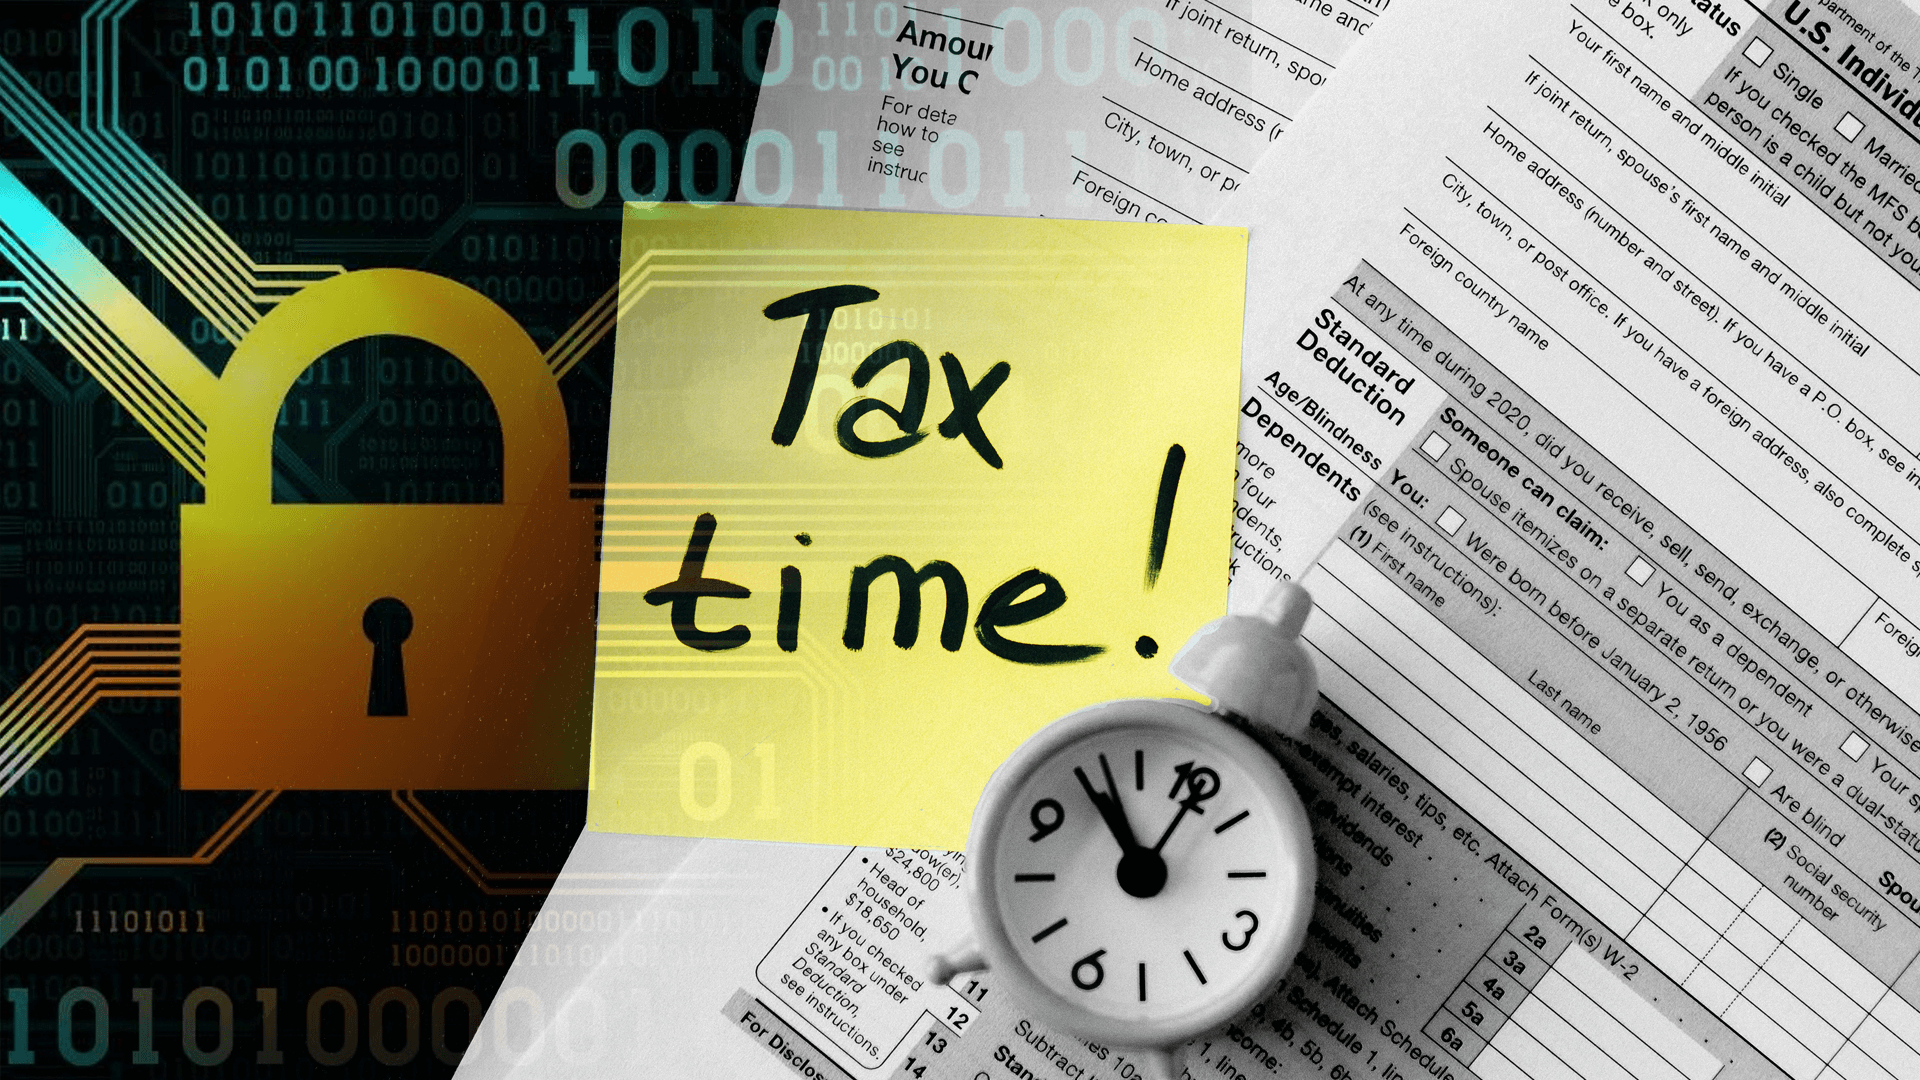 Secure Your Retirement - Image contains tax sticky note and a lock